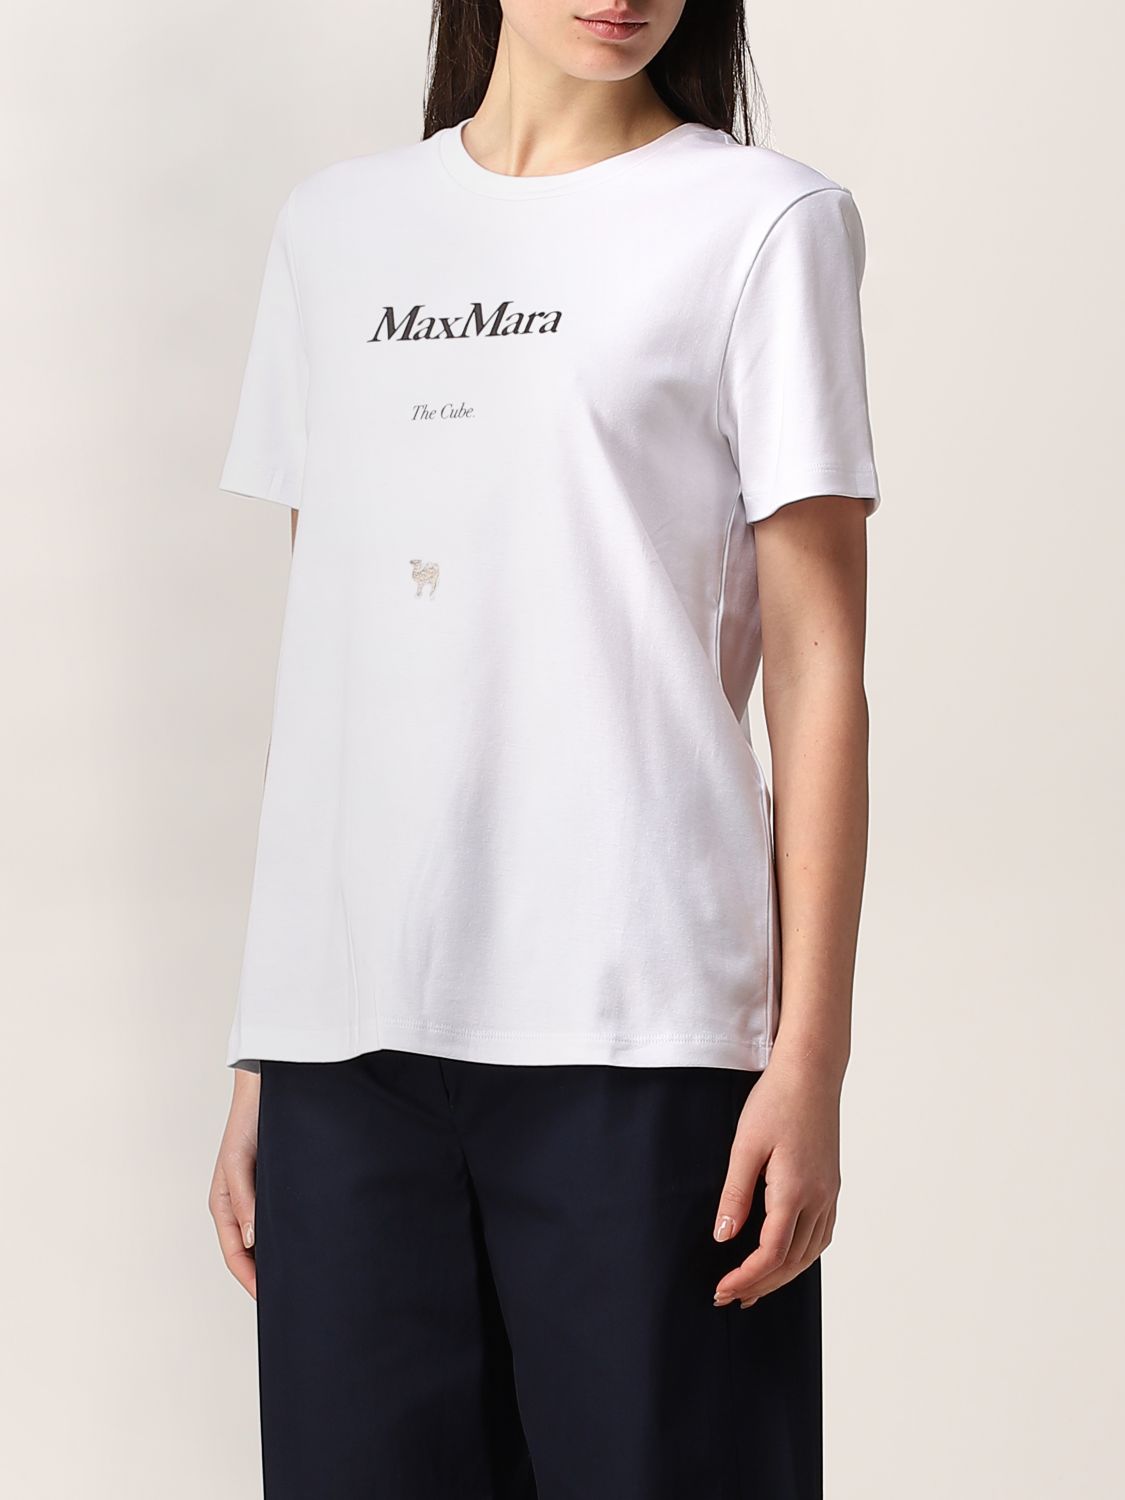 S Max Mara t-shirt in cotton with print